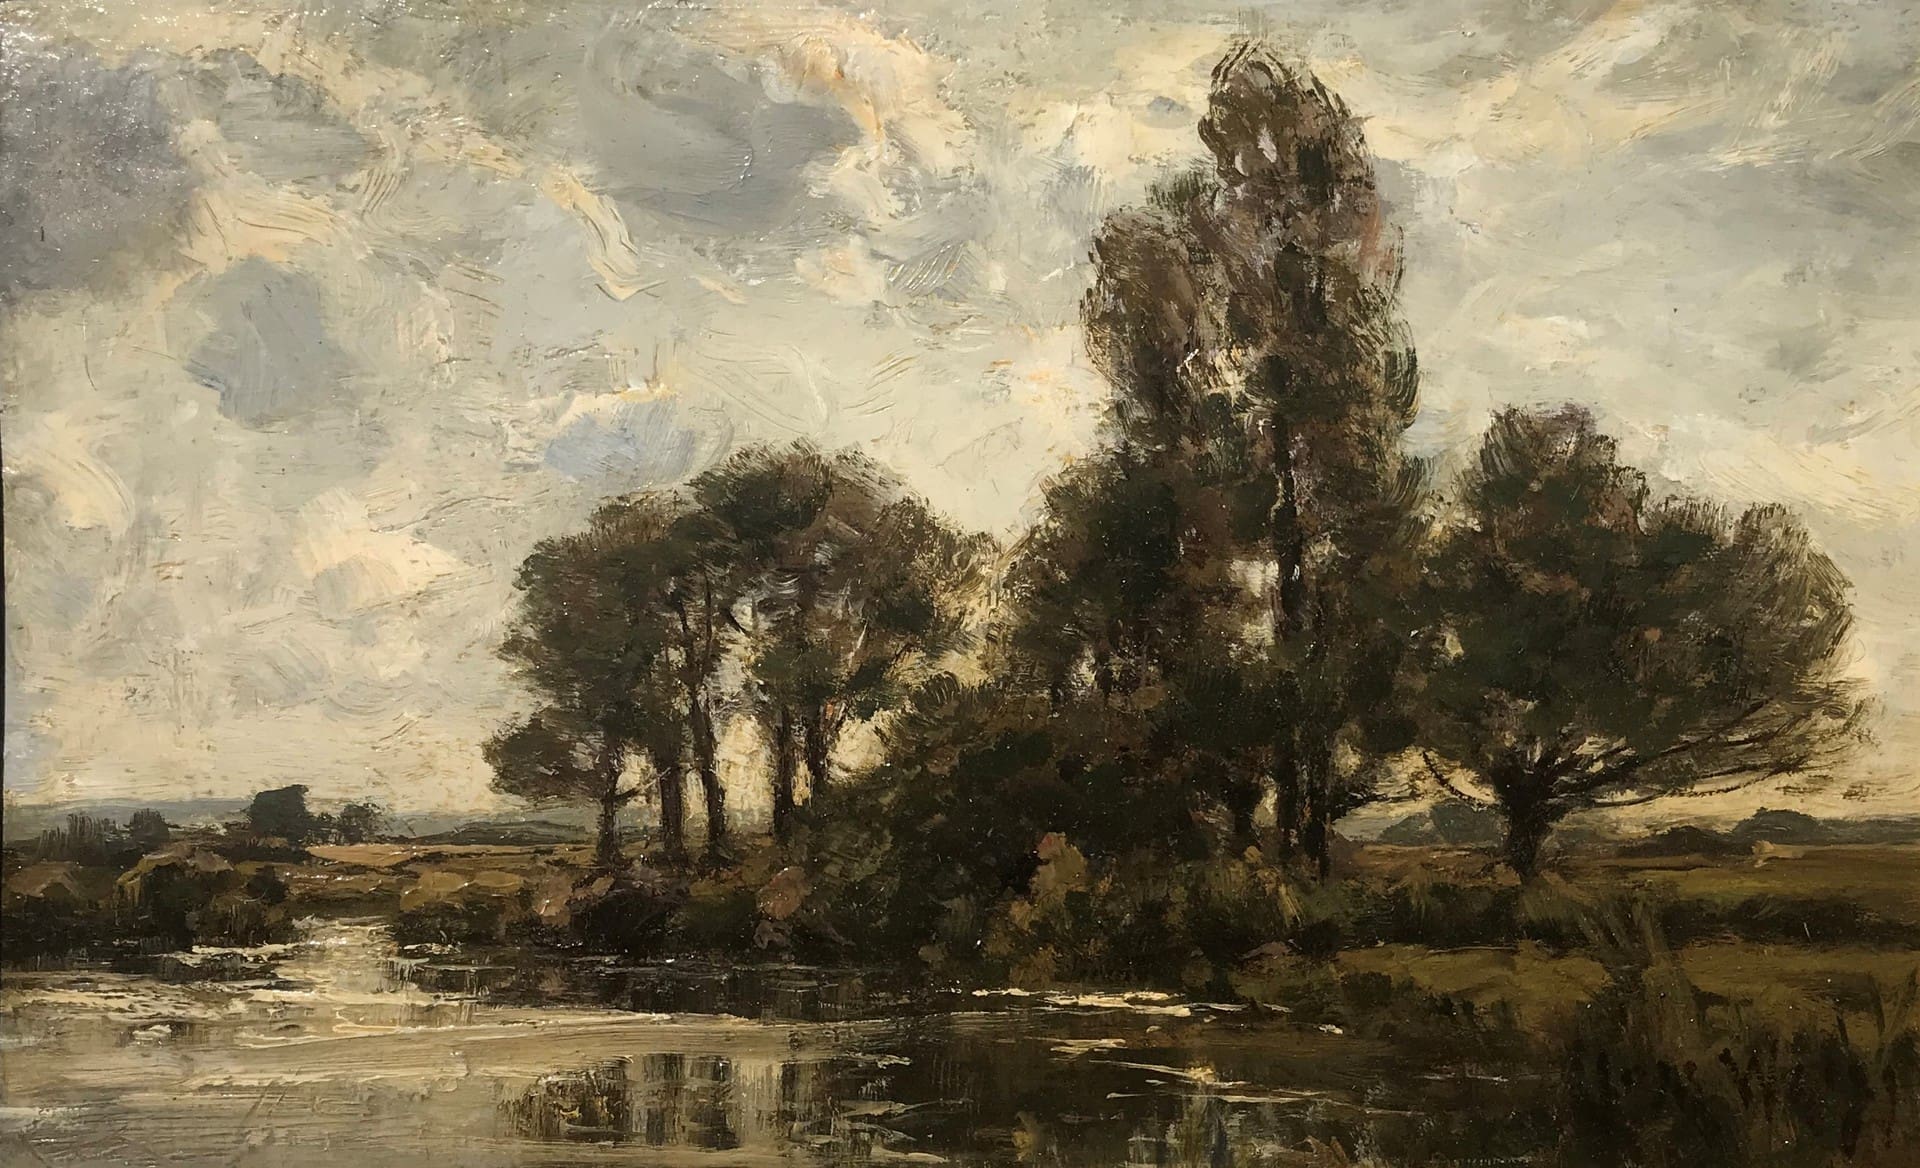 Jose Weiss' On the Thames. Small gem of a painting. Beautiful trees beside the Thames River. Blue, darker skies.